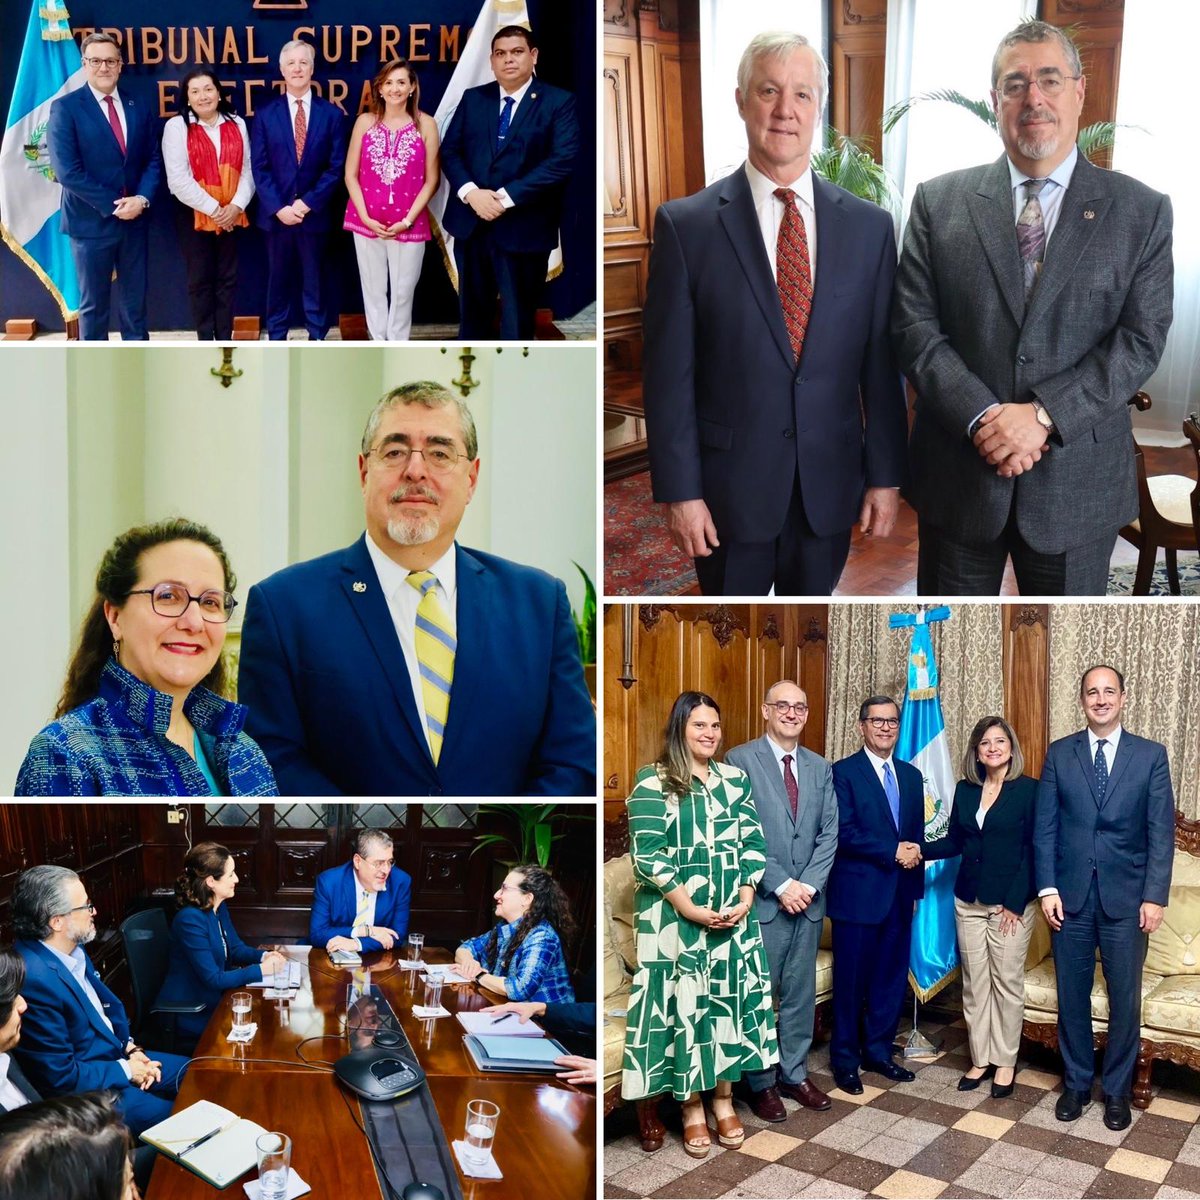 Proud of the leadership CEPPS core partners @IFES1987 @IRIglobal & @NDI display & the partnership they share to strengthen Guatemala's democracy & support its new president @BArevalodeLeon & VP @KarinHerreraVP with IFES president @TonyBanbury & NDI president @tcwittes.